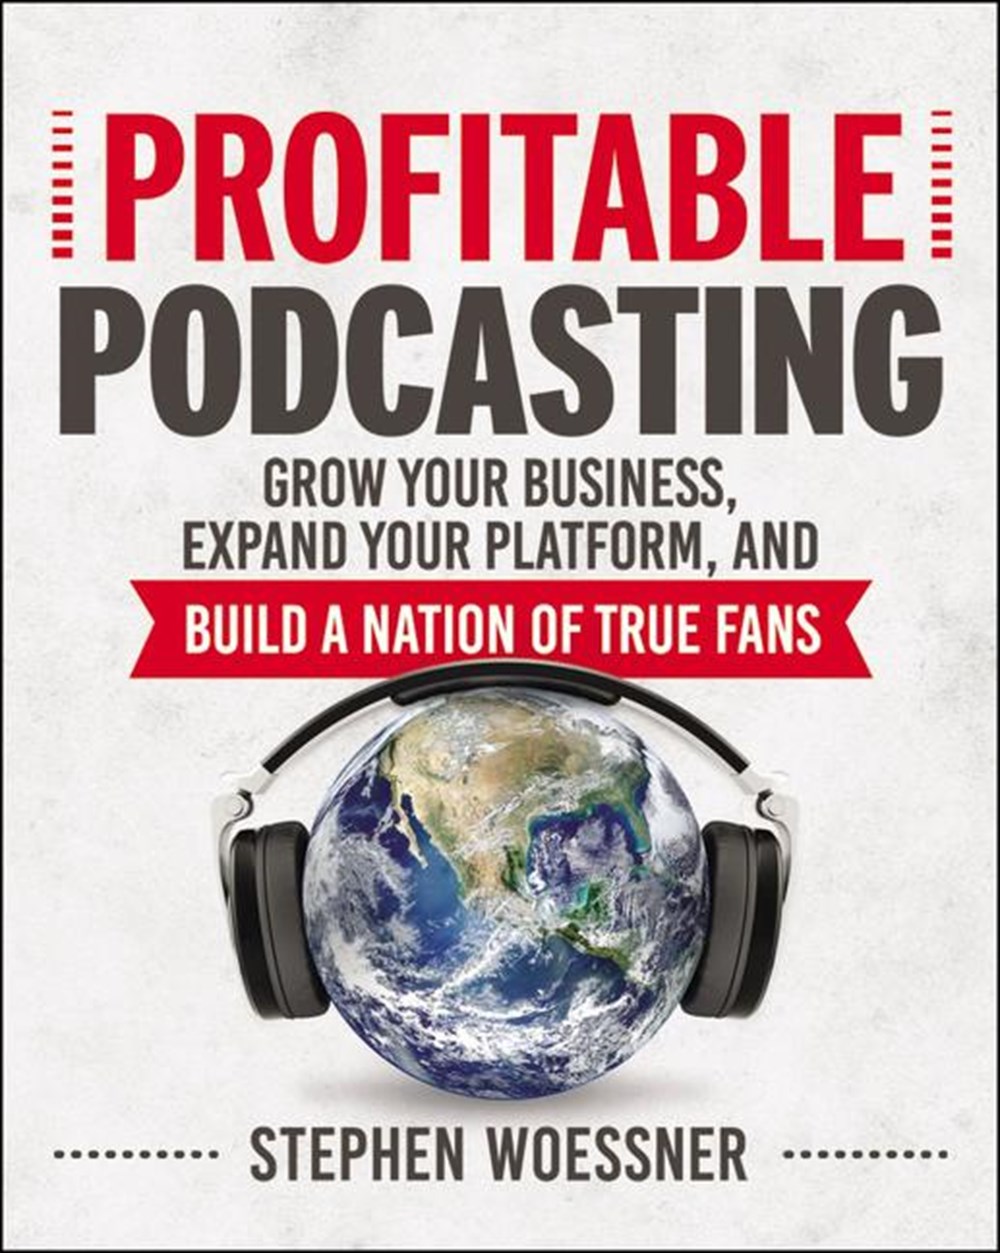 Profitable Podcasting: Grow Your Business, Expand Your Platform, and Build a Nation of True Fans